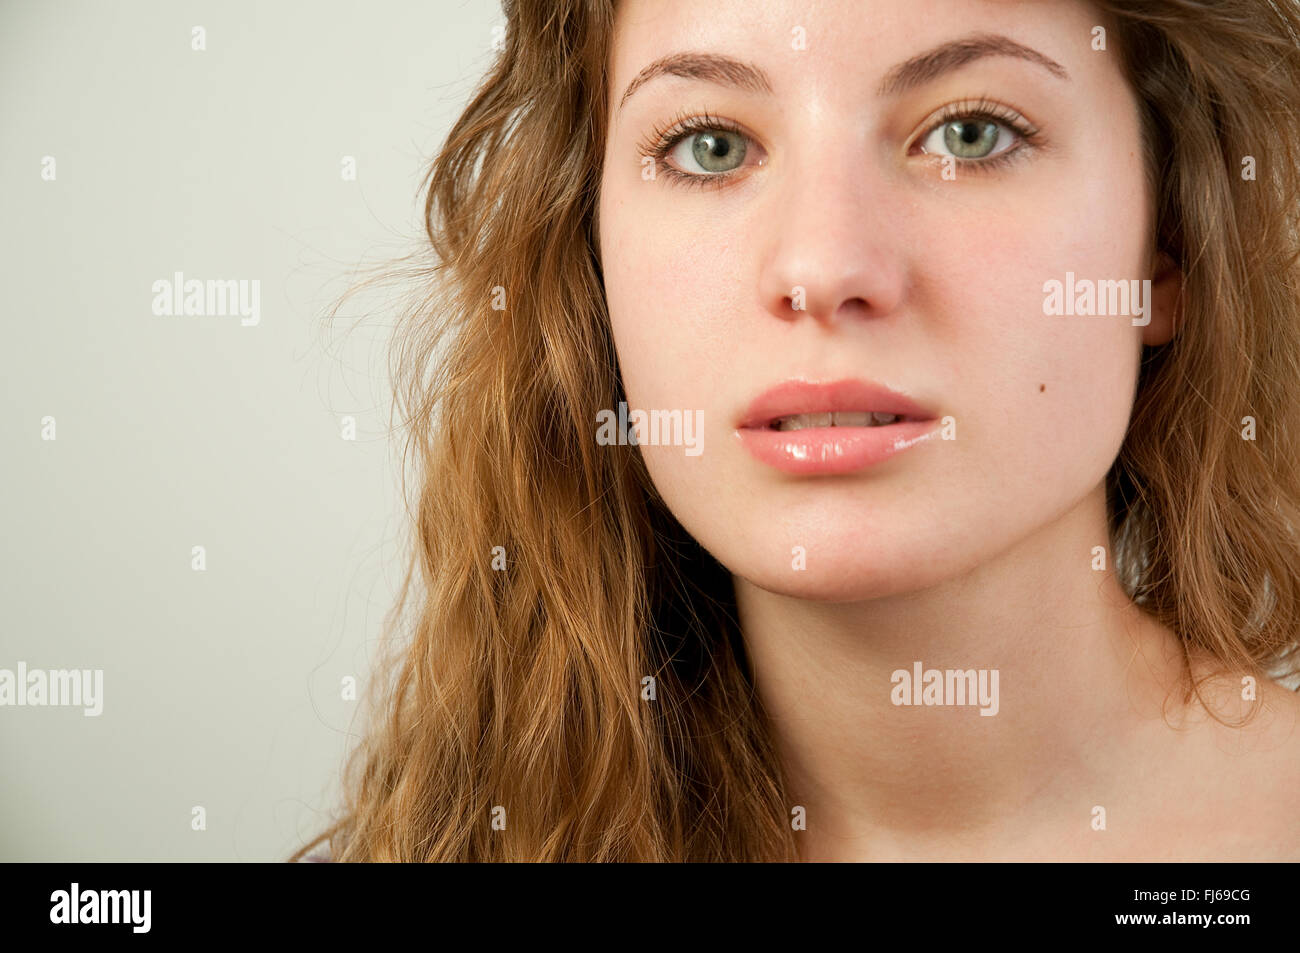 Portrait of pretty young woman. Close view. Stock Photo